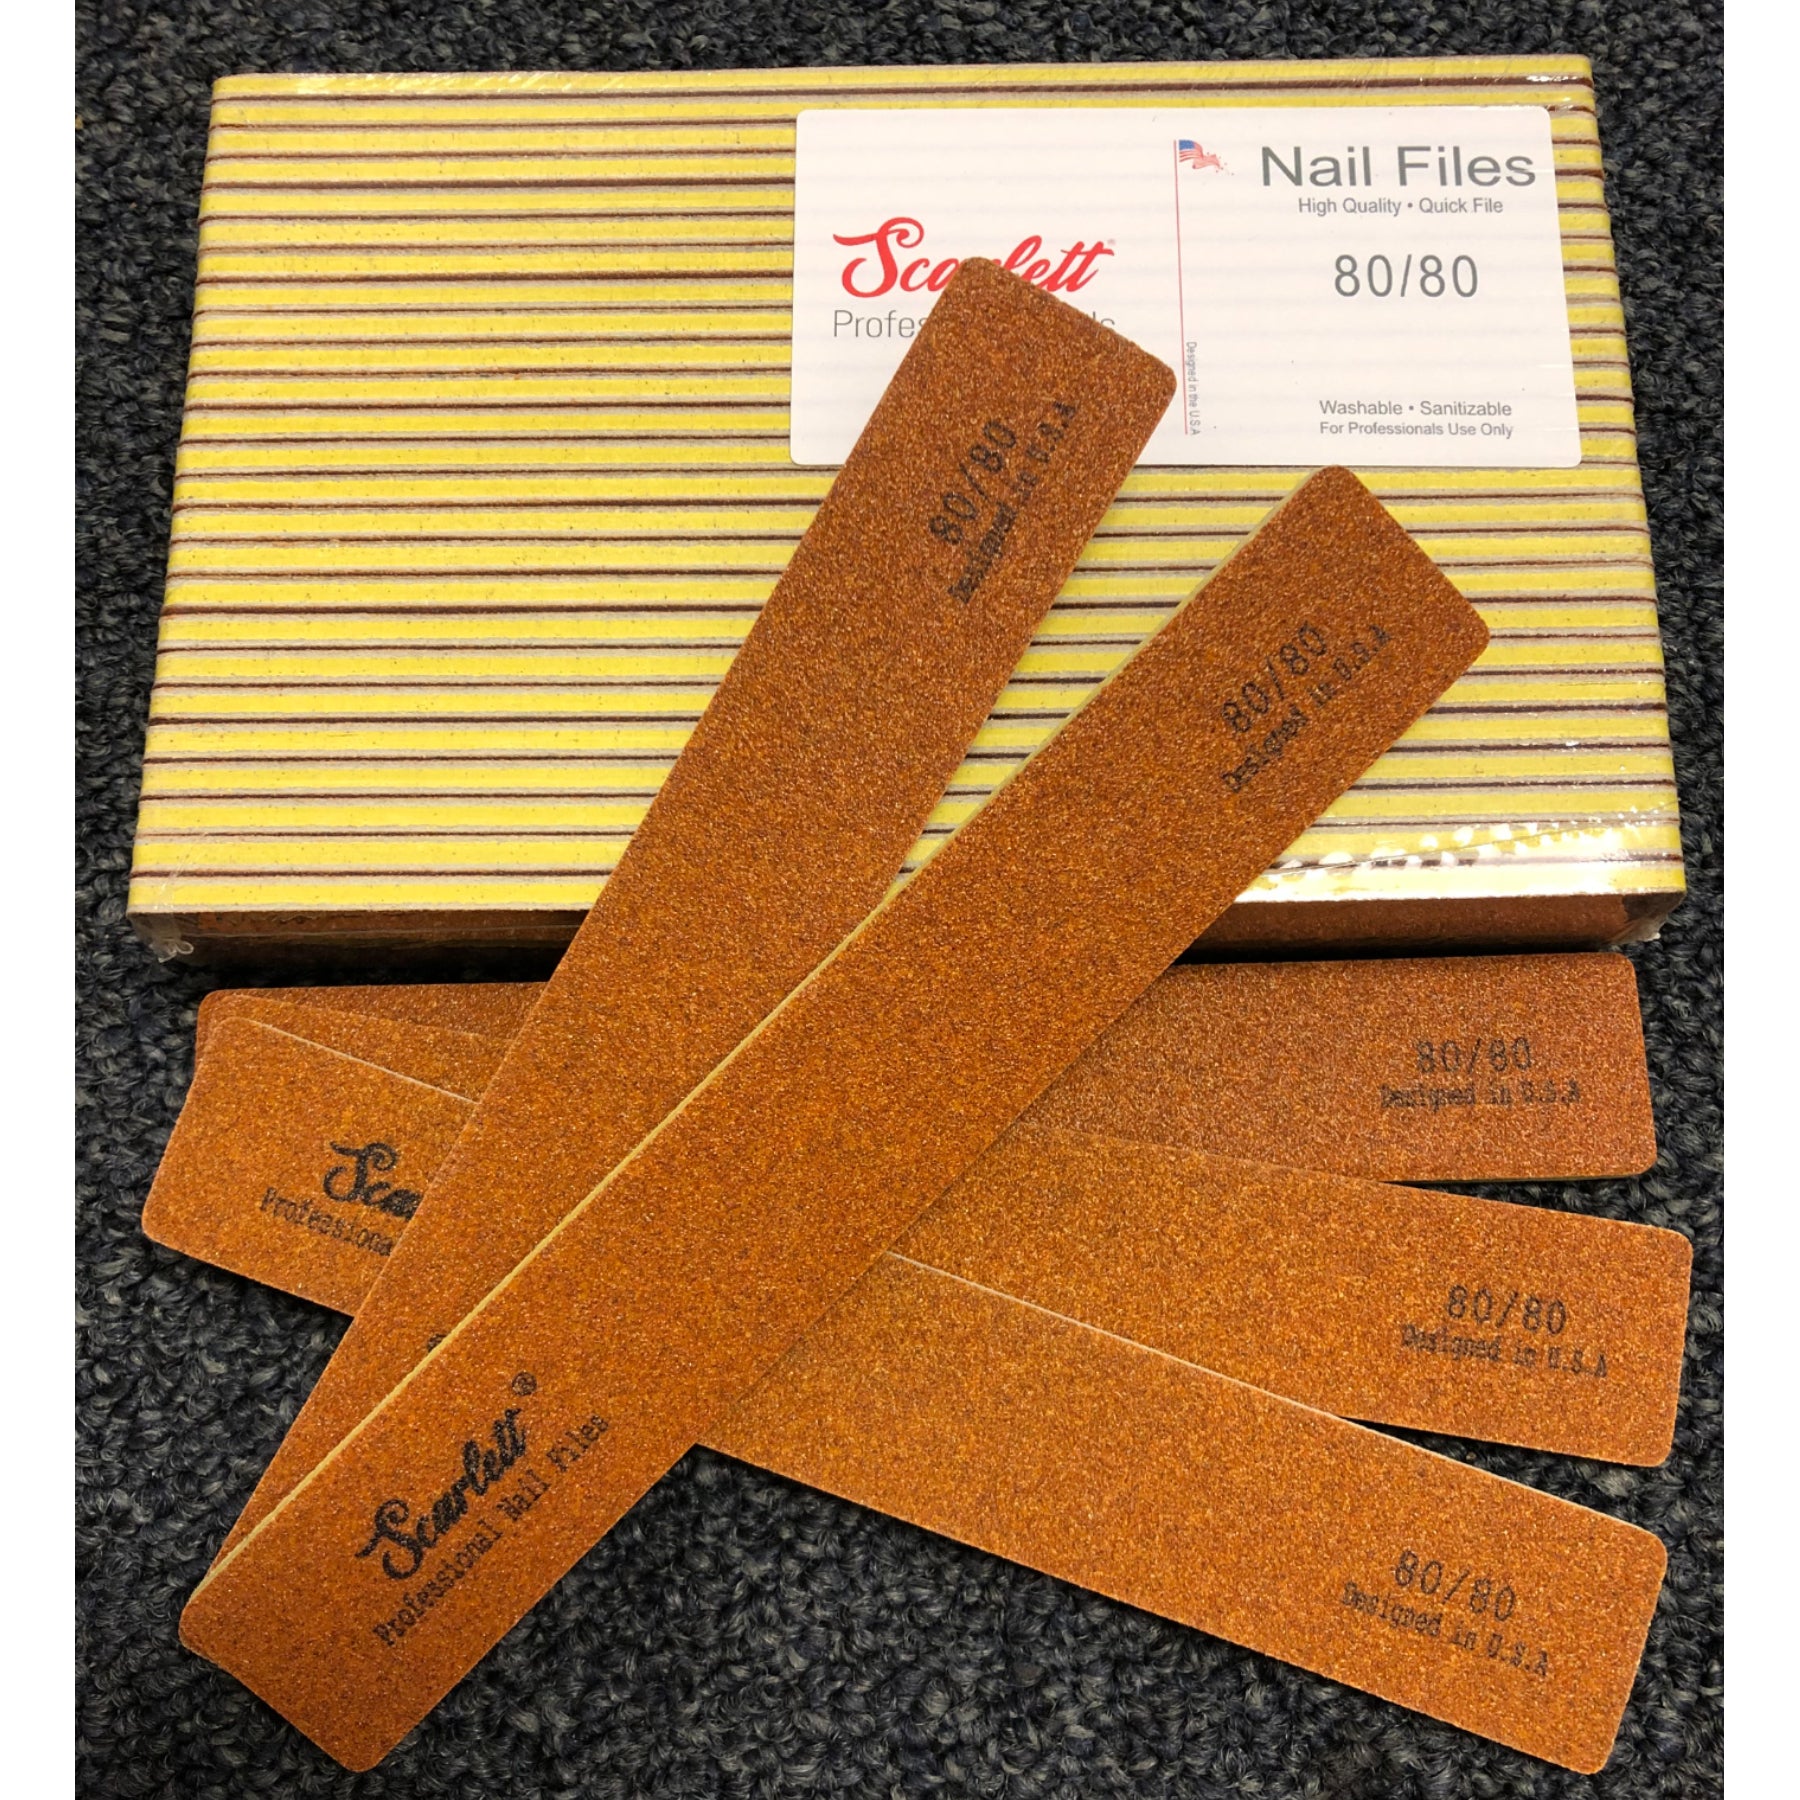 Cushion nail file for acrylic nails. Brown color sandpaper, coarse grit 80 for quick filing nails